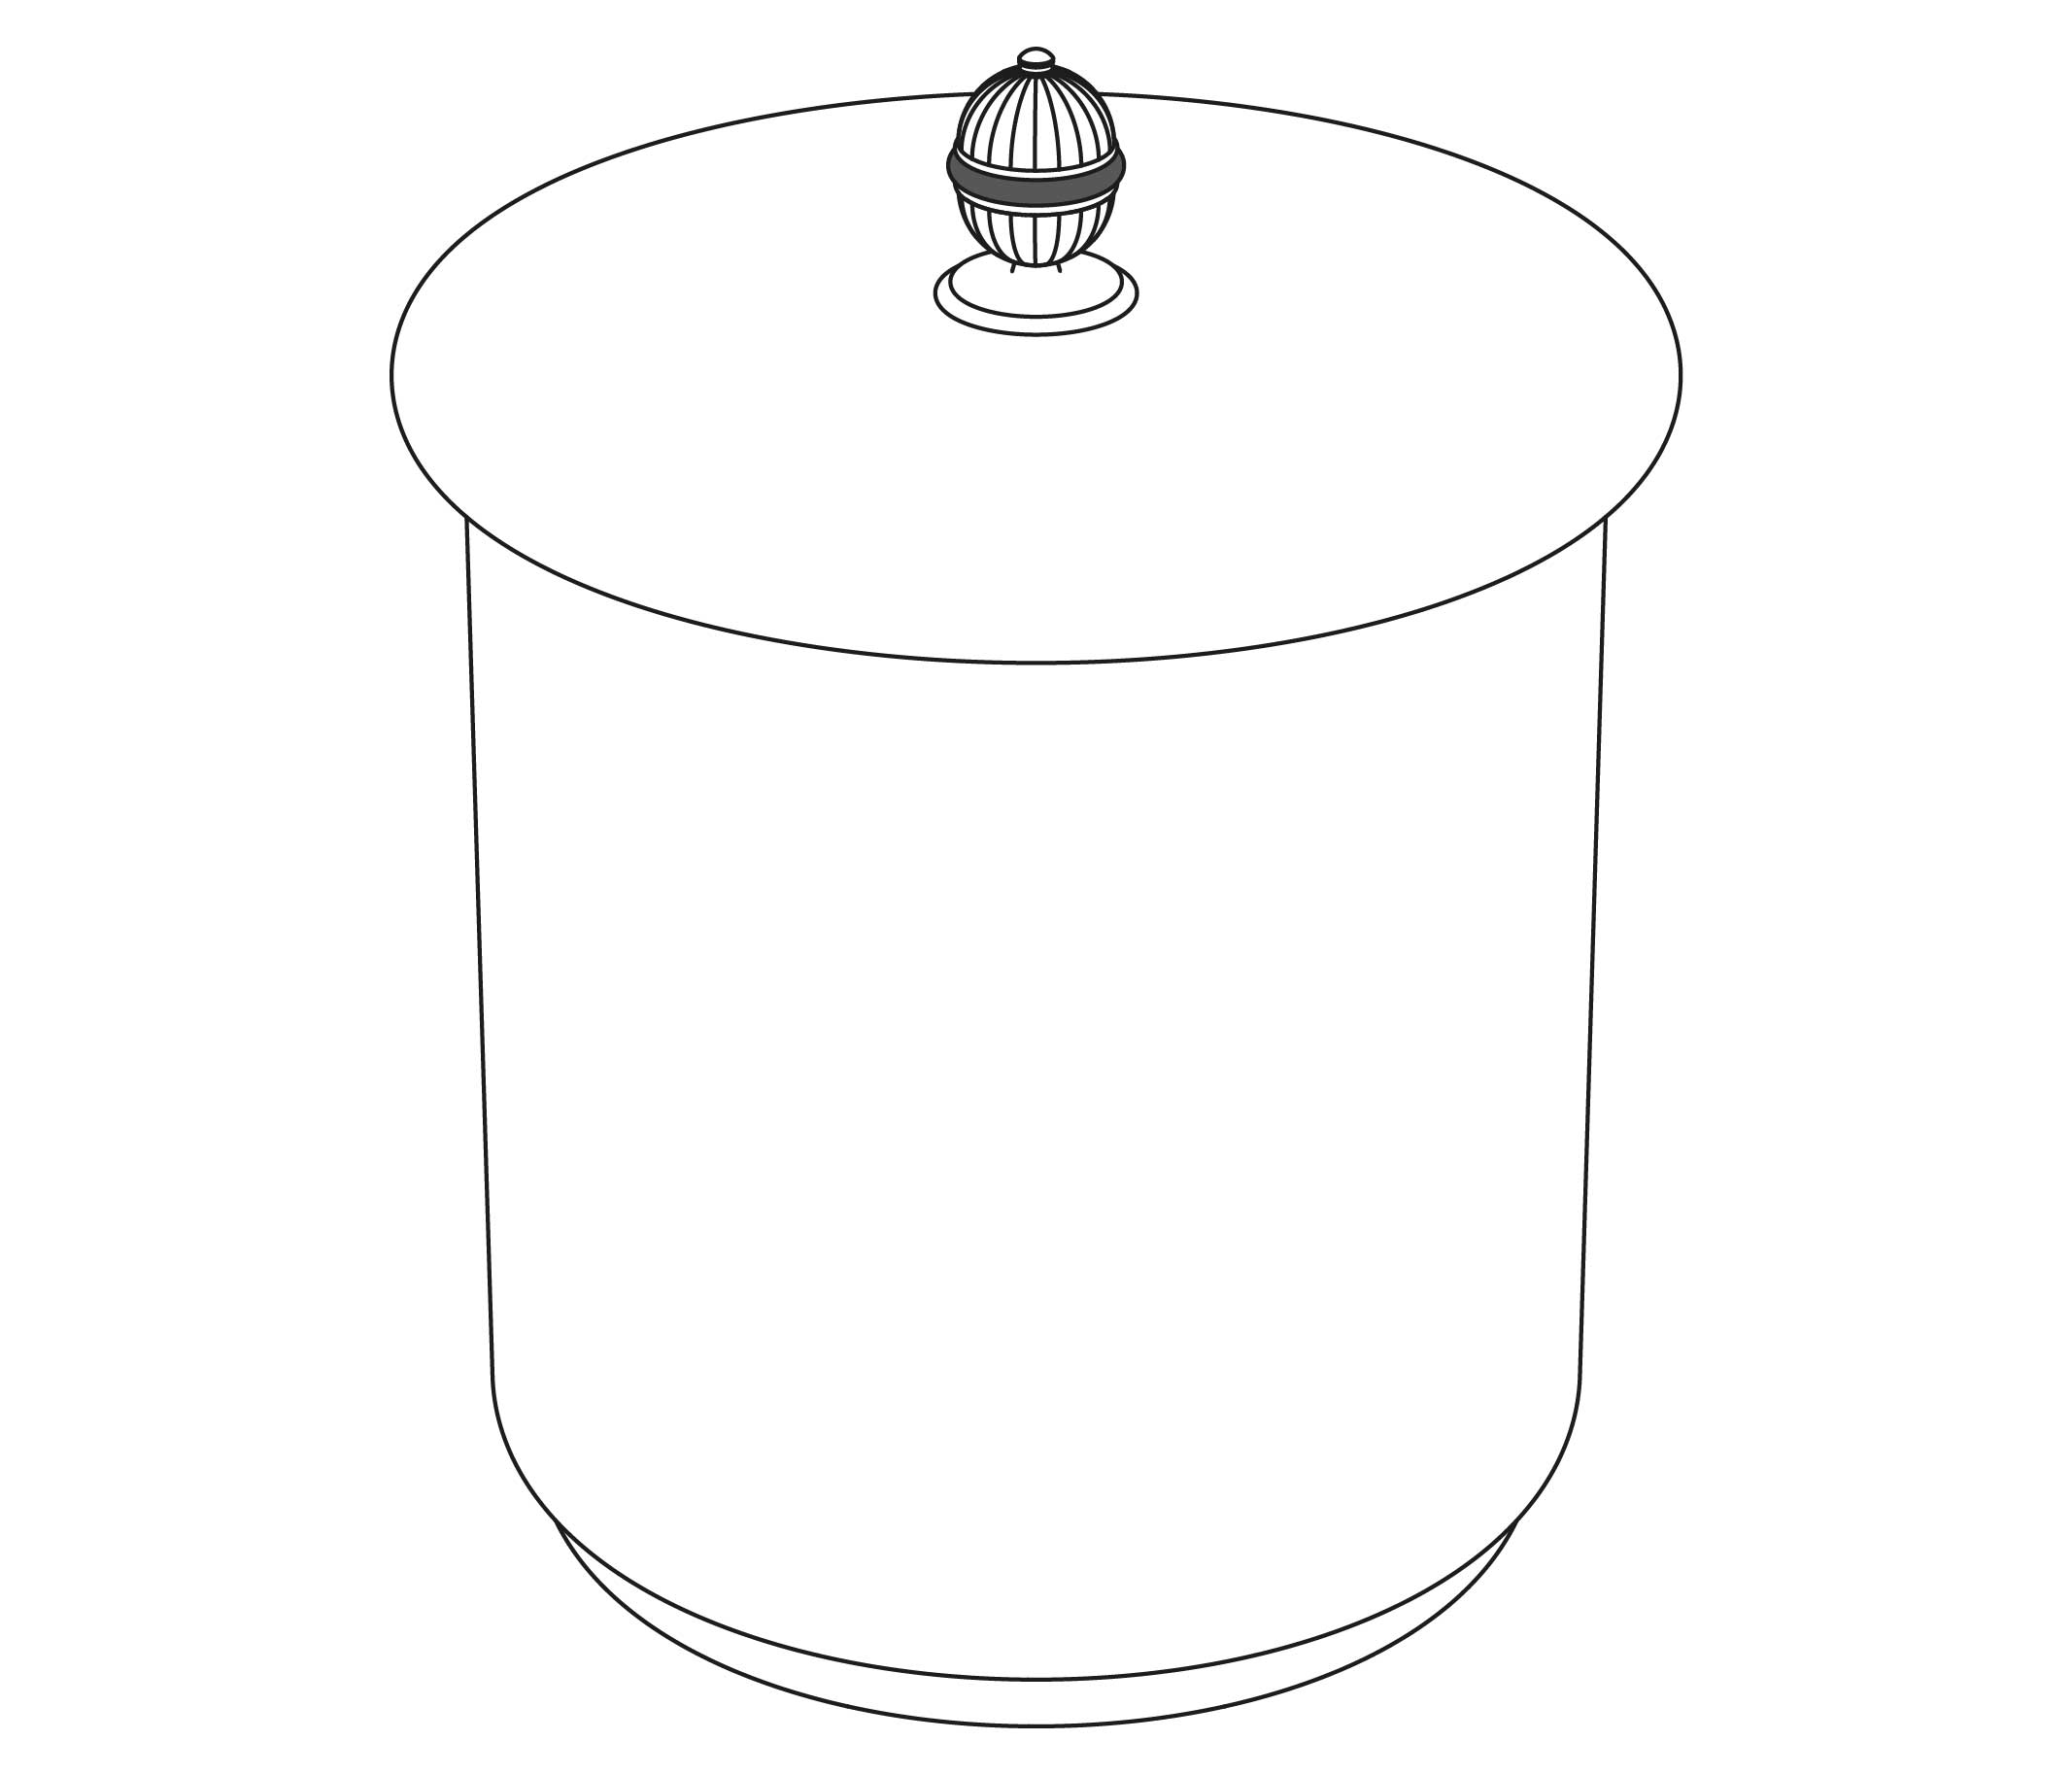 S189-577 Bin with cover